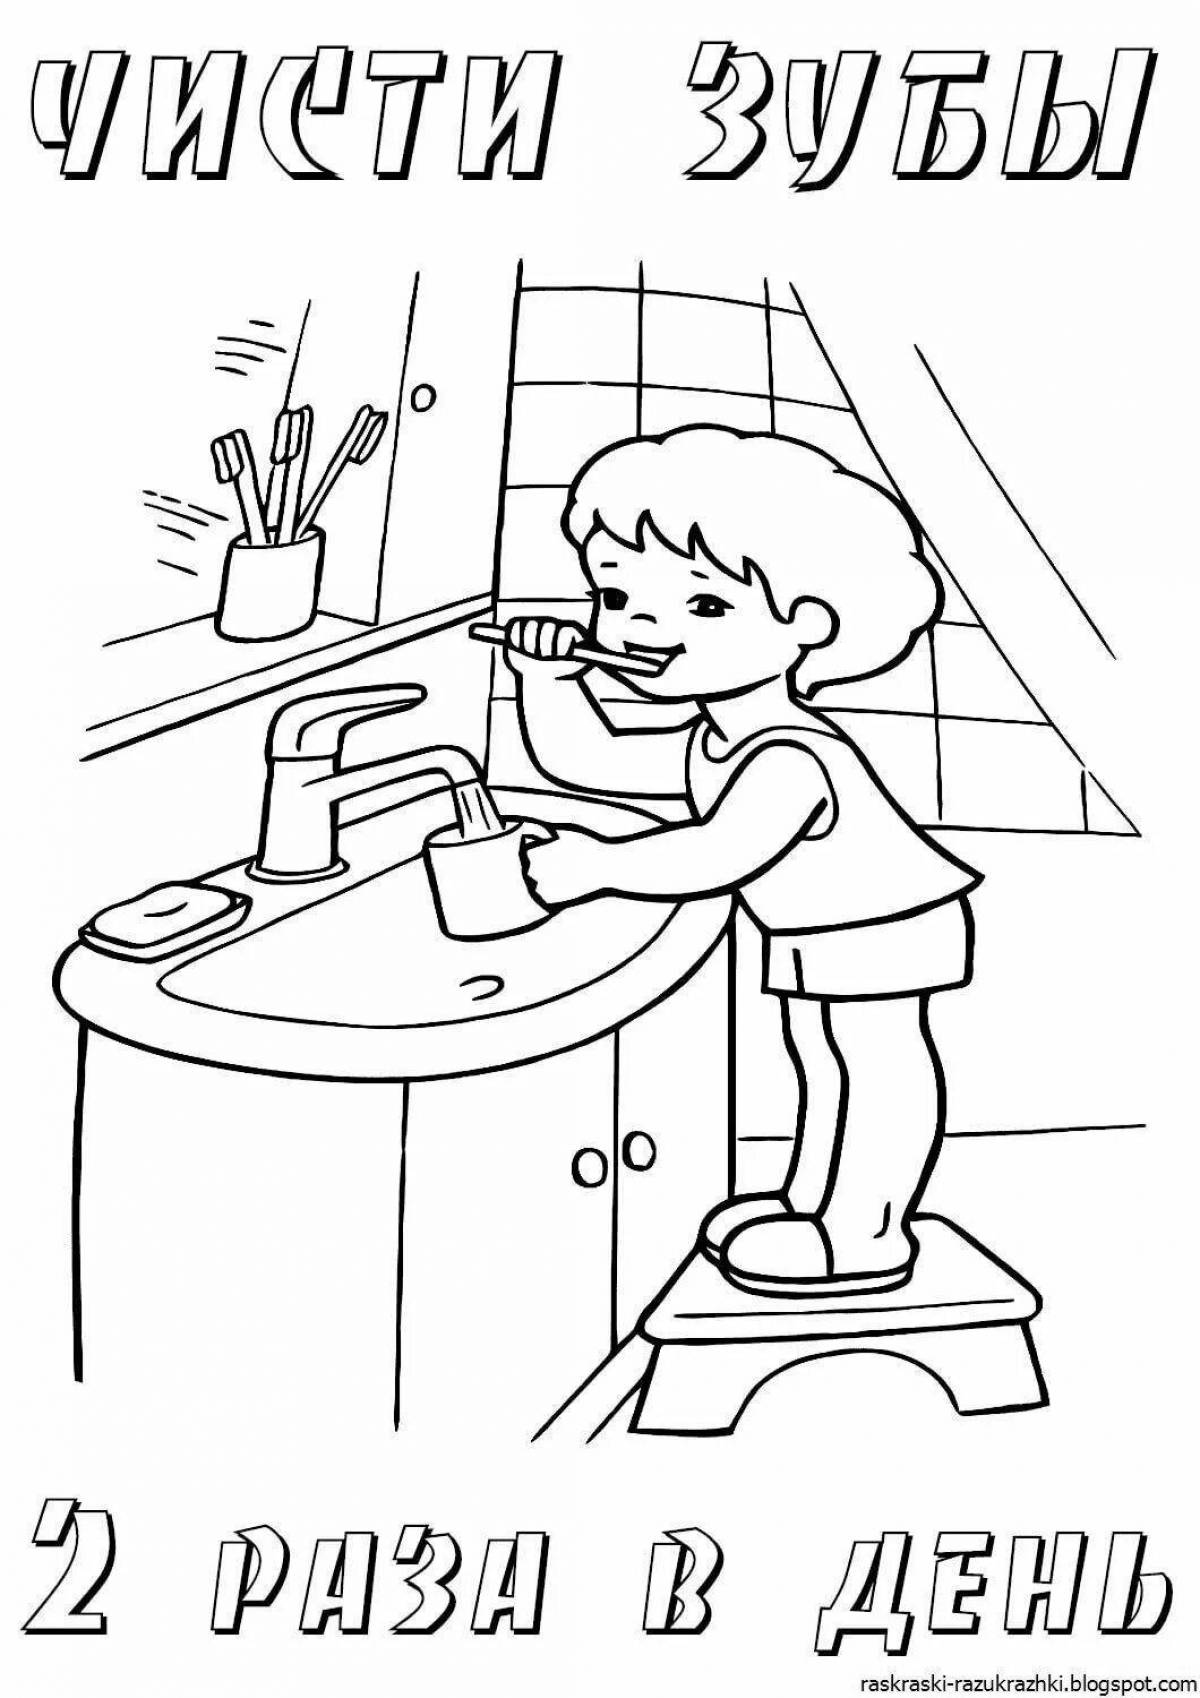 Bright healthy lifestyle coloring page